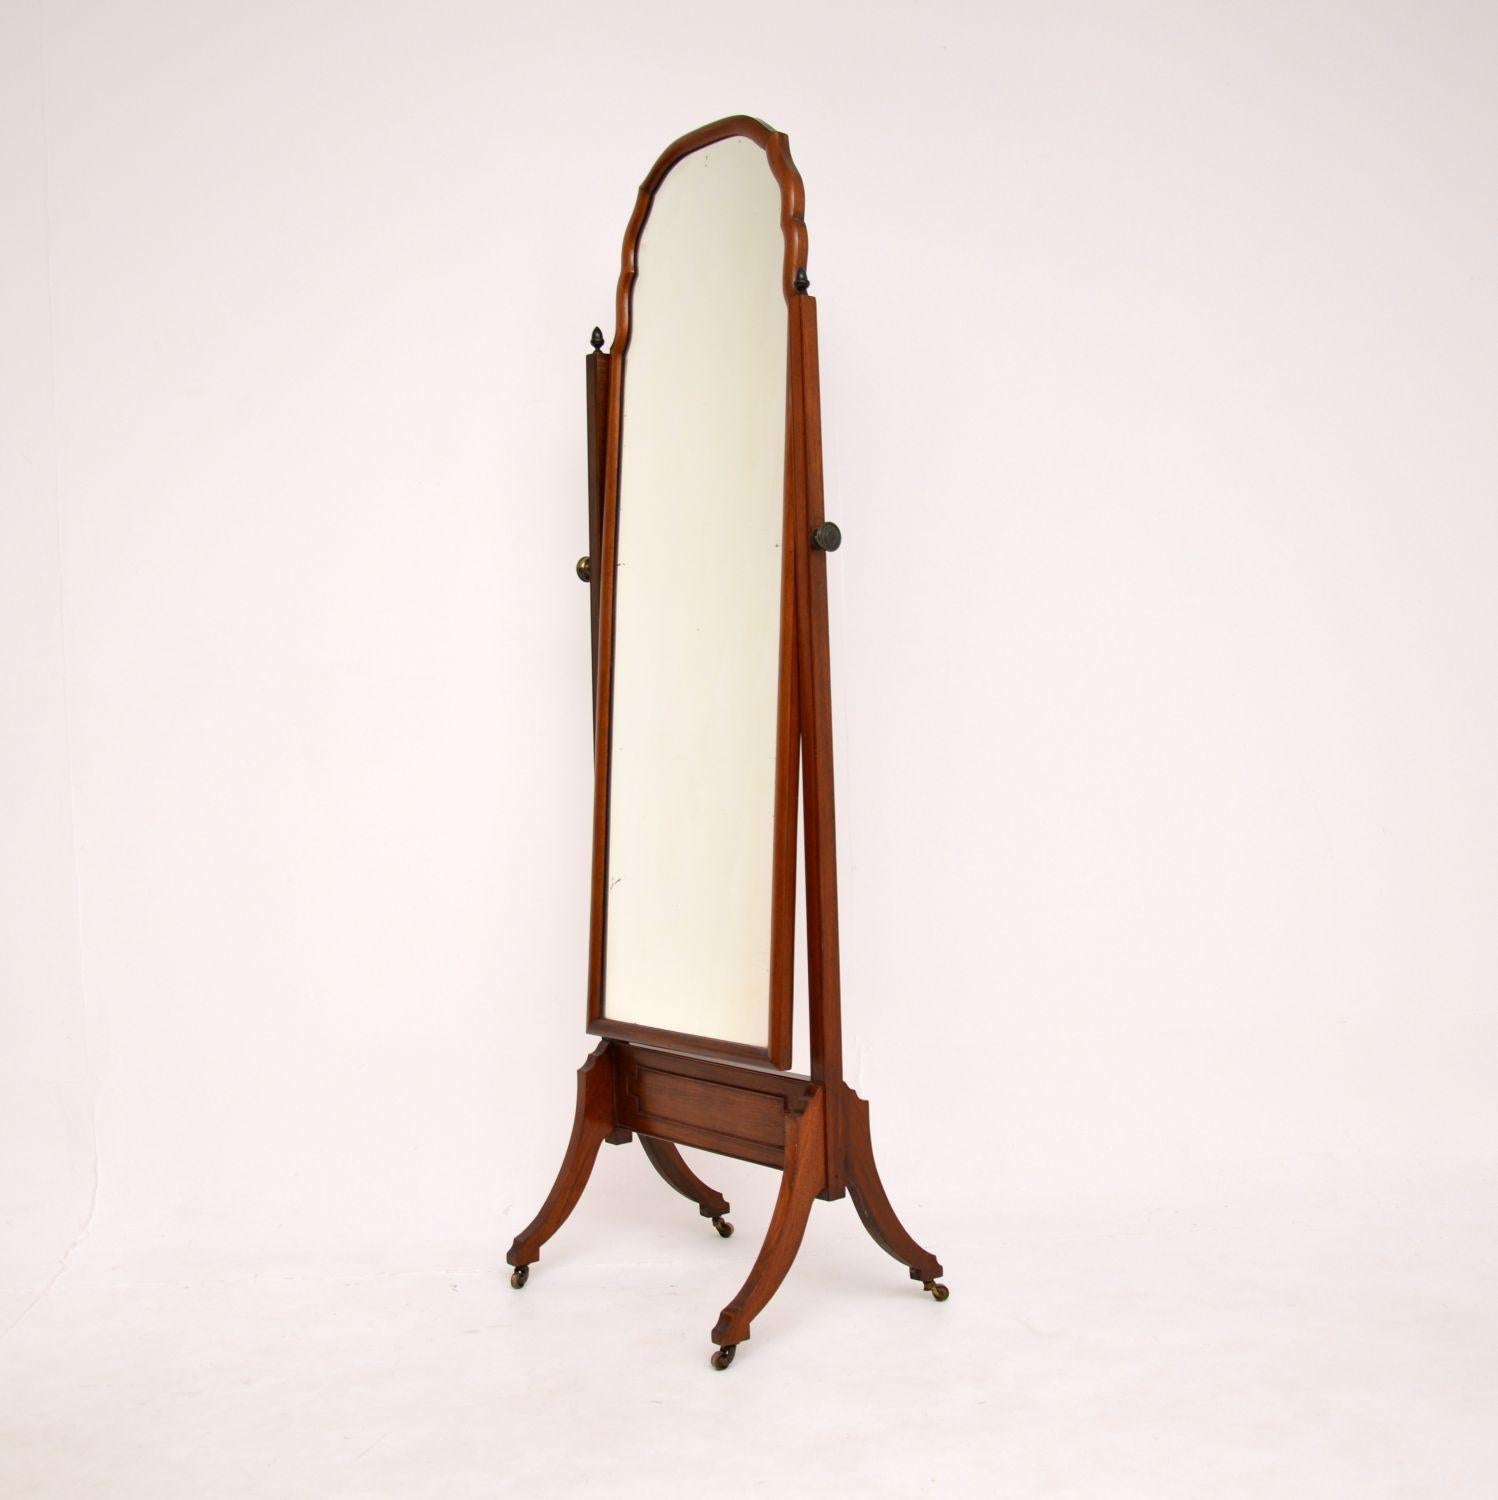 A lovely antique Edwardian Cheval floor mirror. This was made in England, it dates from the 1900-1910 period.

This is of very good quality, it is very well made and is a useful size. The mirror can be tilted and removed for ease of transport. It